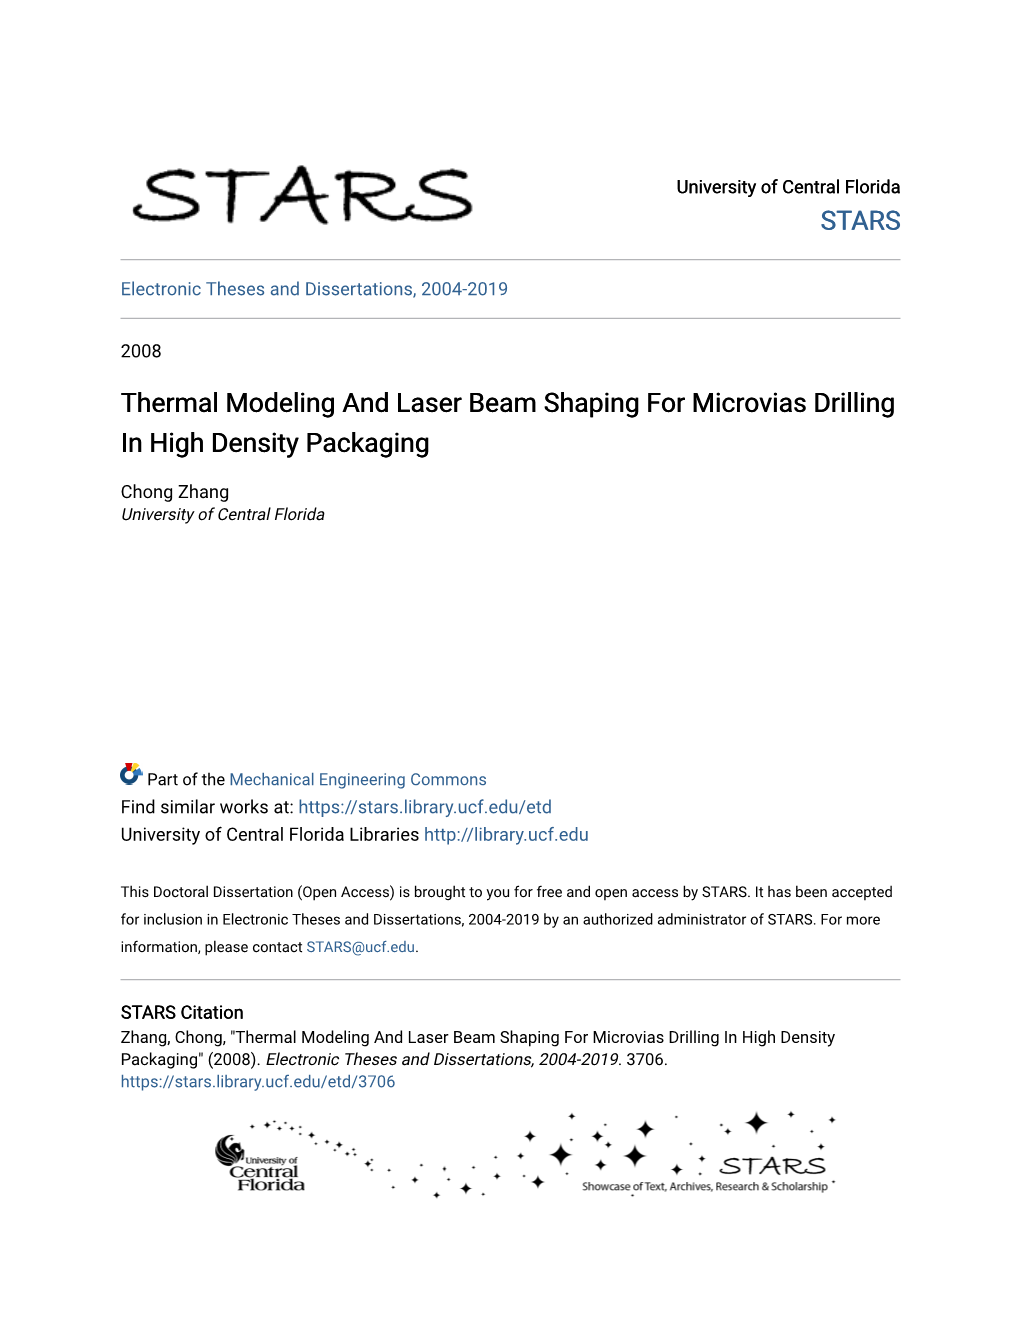 Thermal Modeling and Laser Beam Shaping for Microvias Drilling in High Density Packaging